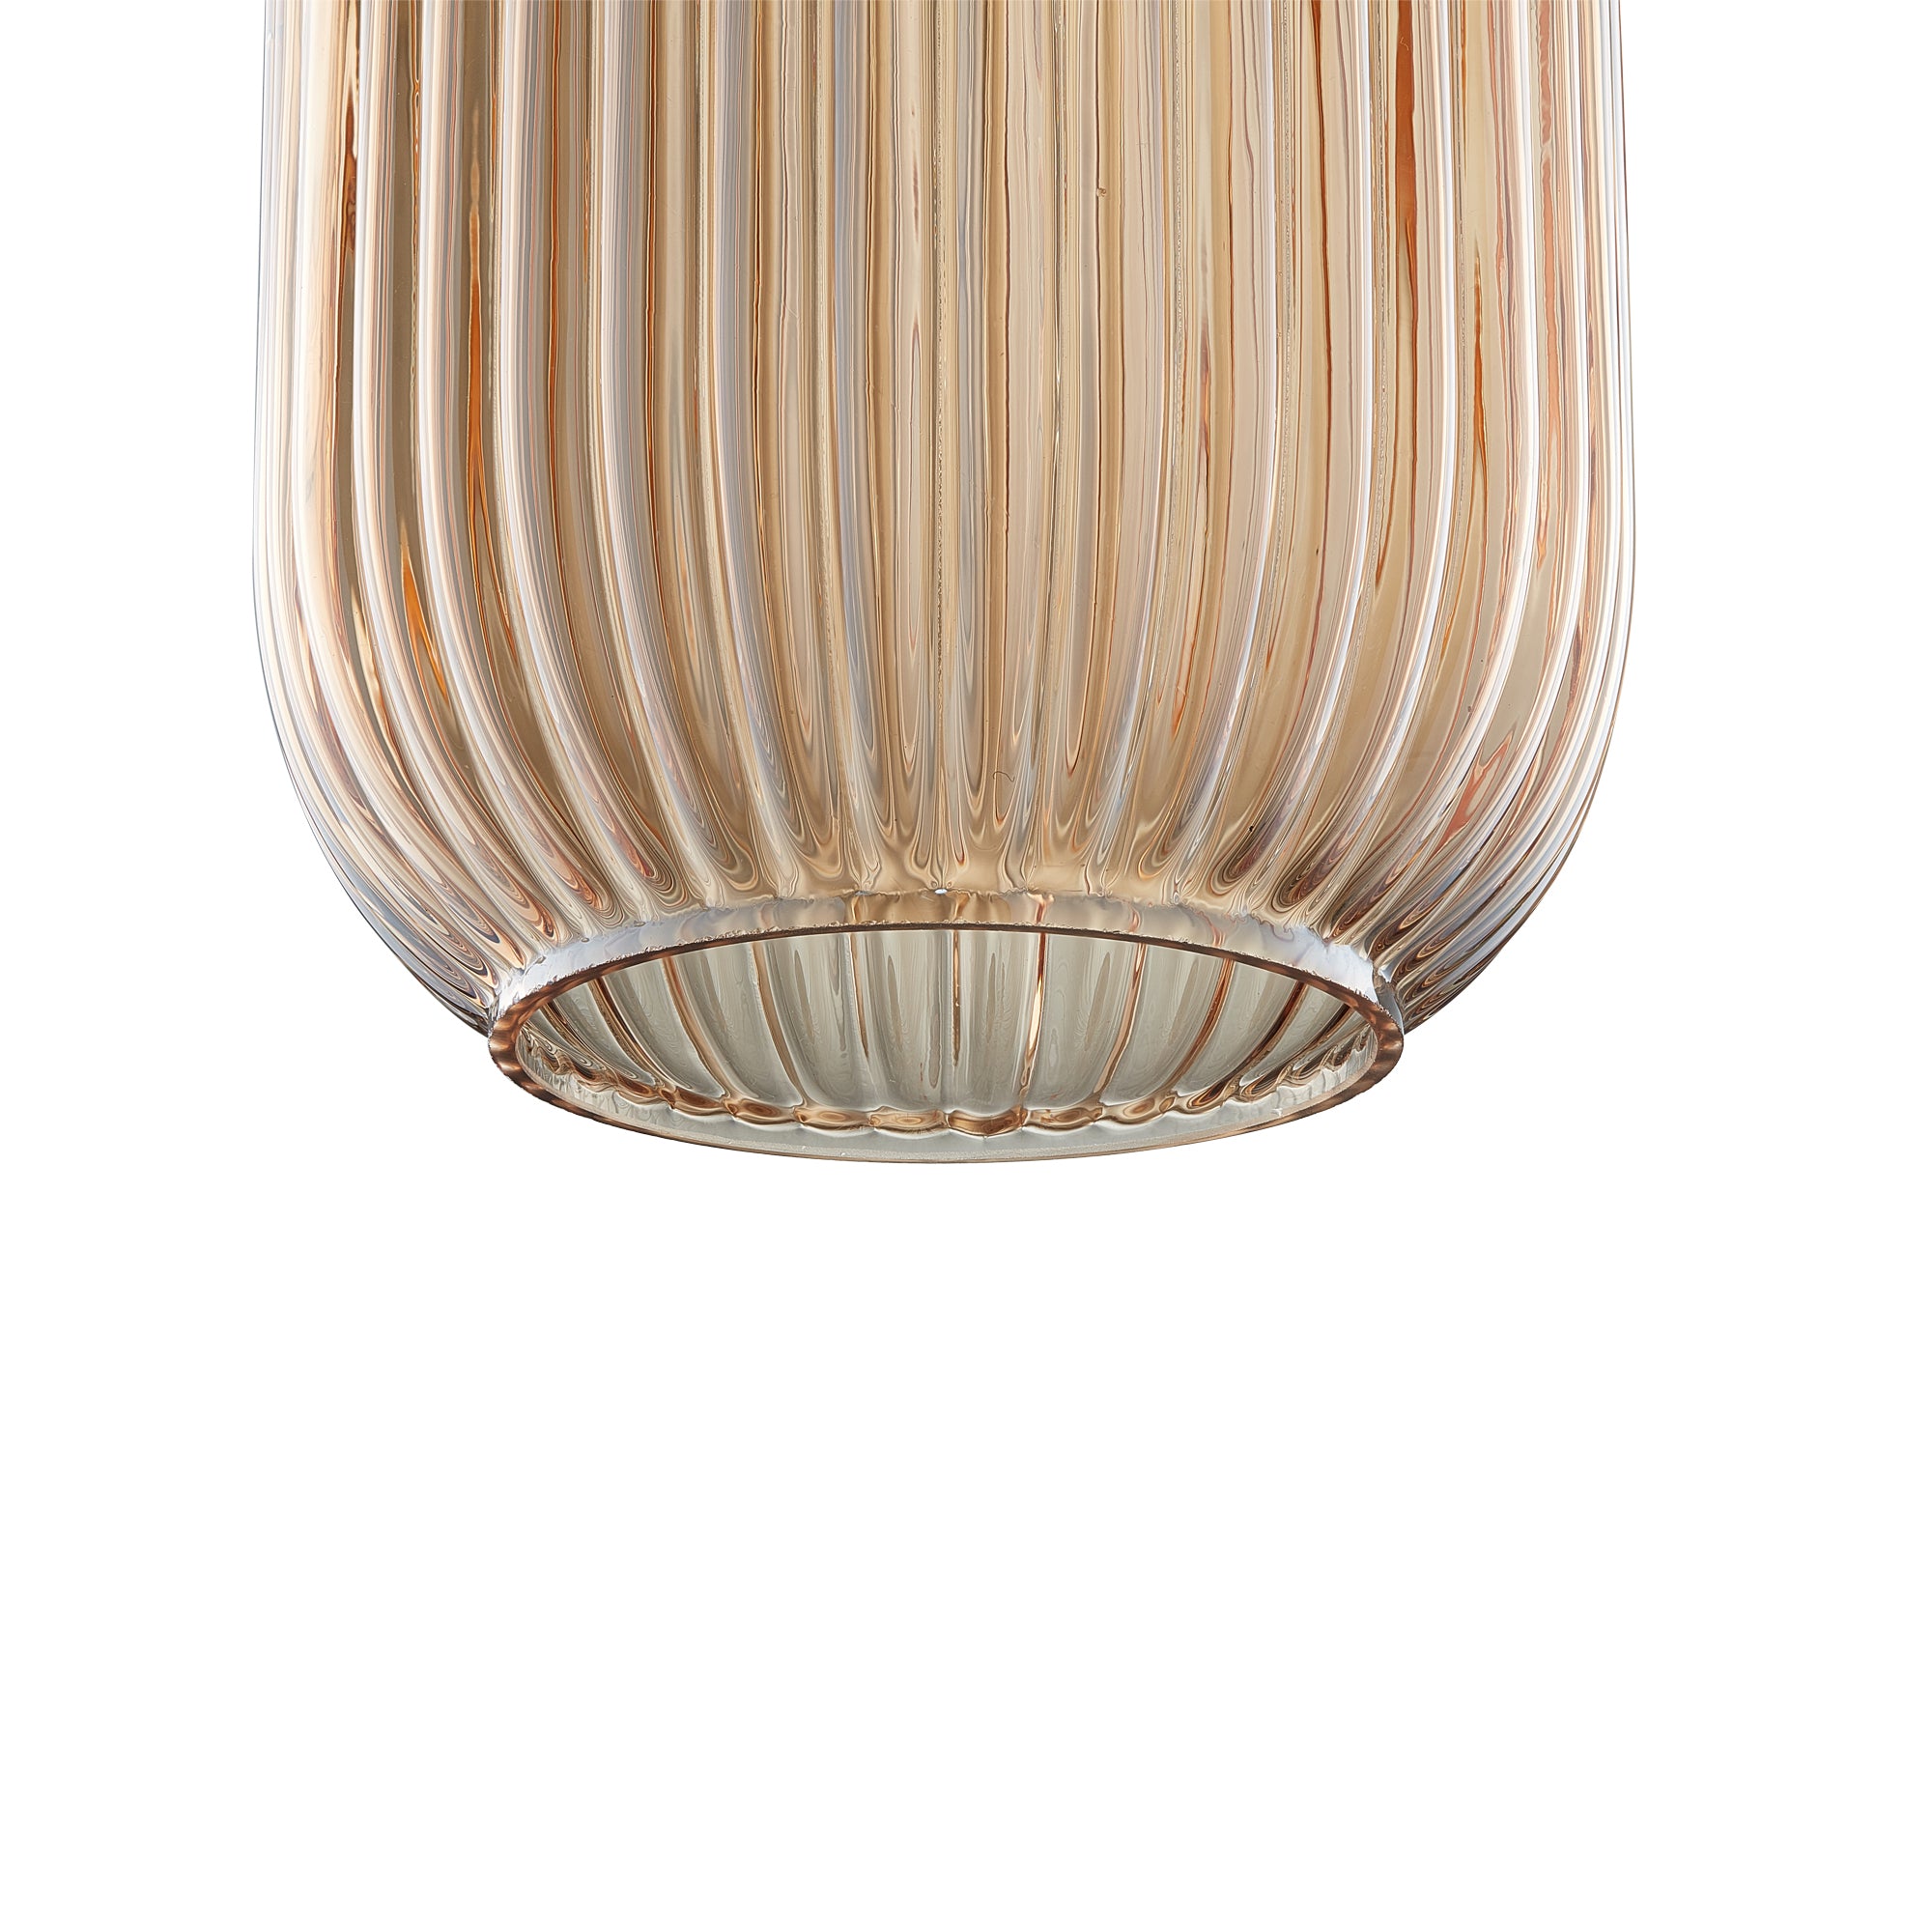 Smafan Cygnus Pendant Light Collection features a translucent elongated ribbed glass shade that creates an eye-catching glow. Hanging from a rich gold tone brass finish canopy that enhances its modern sophistication. Place over dining areas, seating areas, and more for a dramatic look. Its versatile look can complement most any room style.